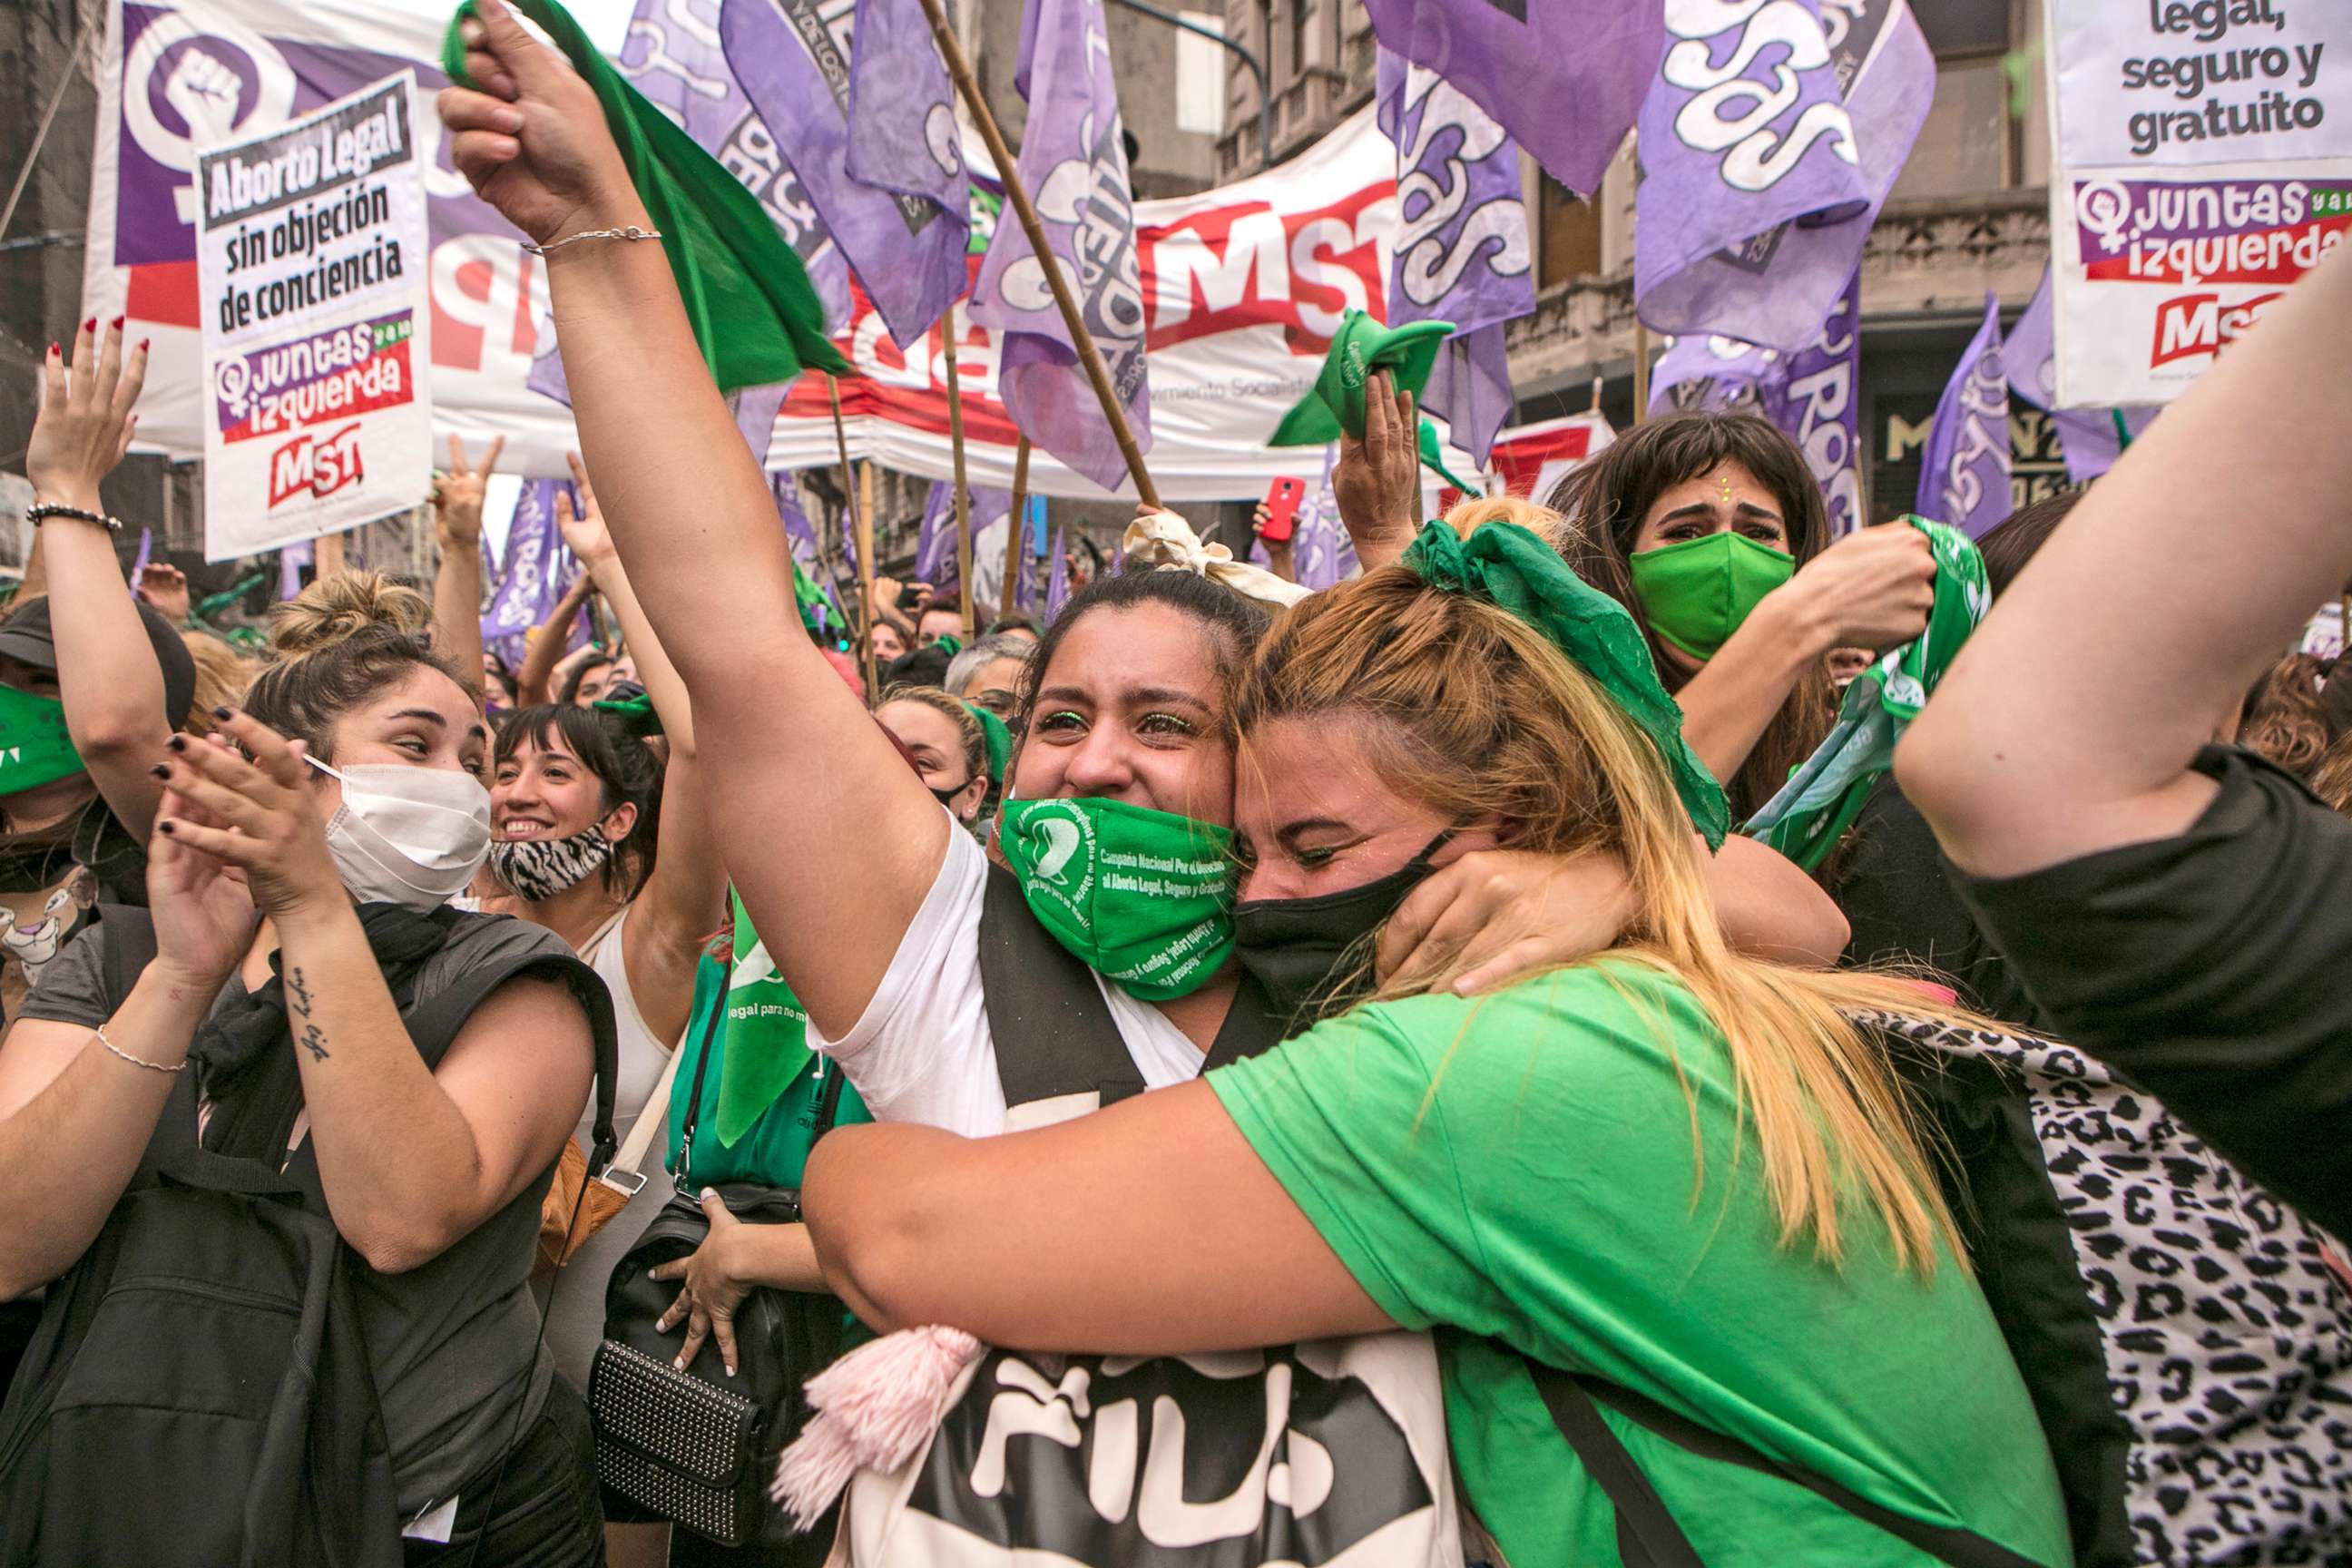 PHOTO: Pro-choice demonstrators celebrate after a bill to legalize abortion is advanced by the lower house representatives in Buenos Aires, Argentina, on Dec. 11, 2020. The bill will now pass to the Senate for its review.